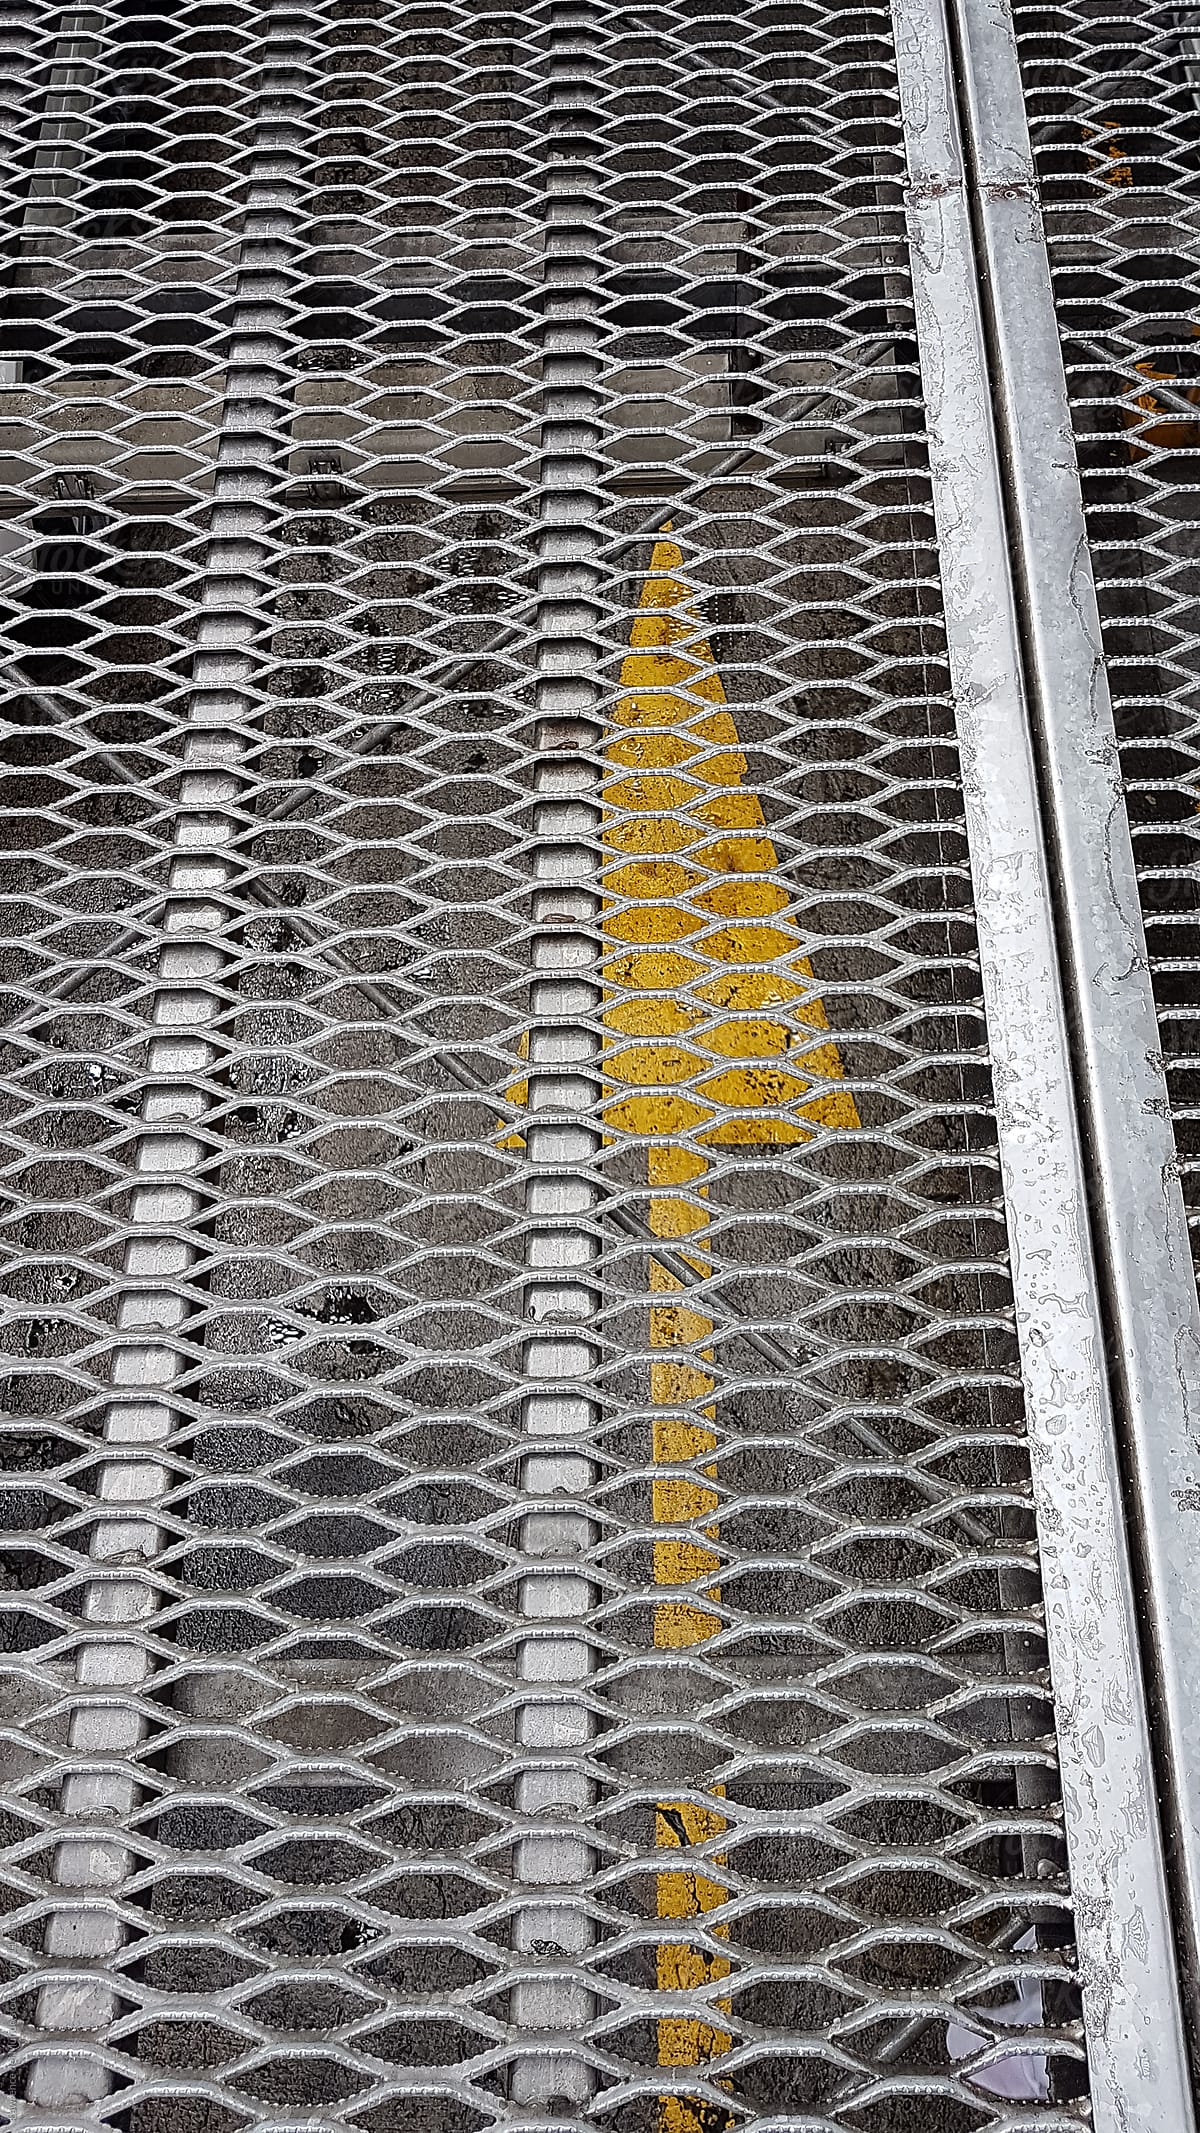 View of ground level parking from the steel mesh flooring of a temporary parking building.